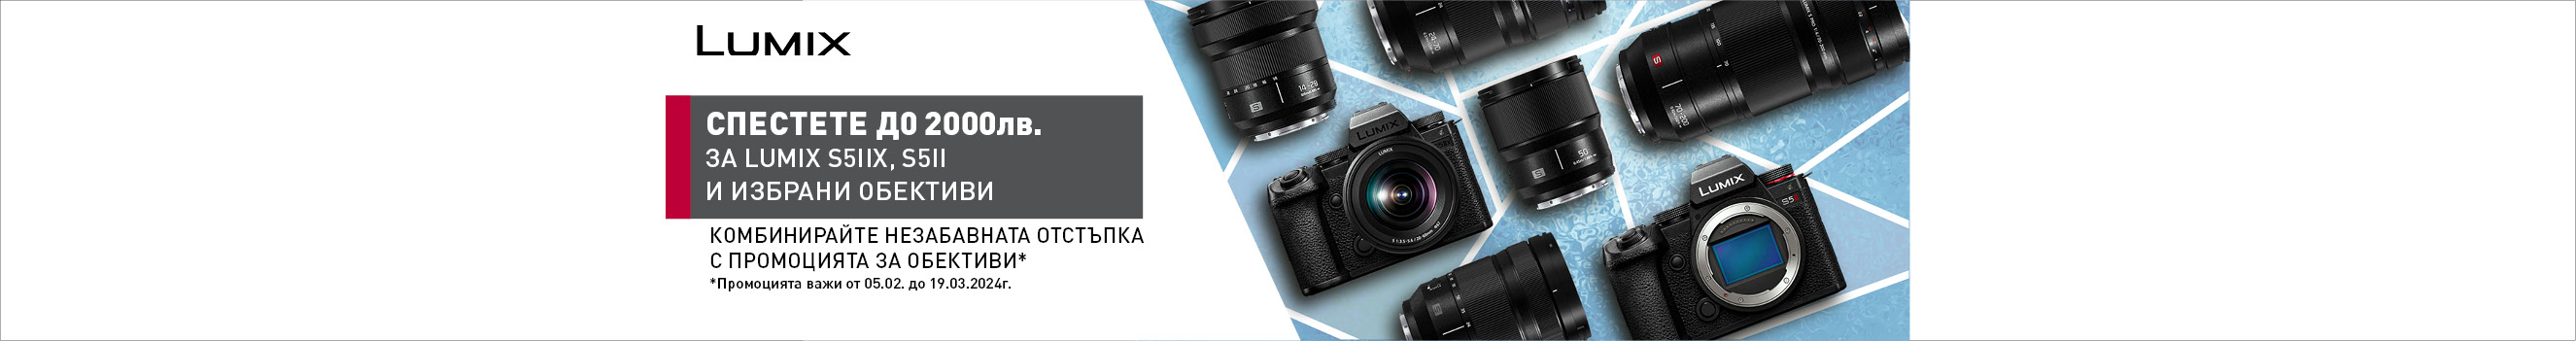  Get up to -1800 BGN discount for Panasonic Lumix cameras and lenses 